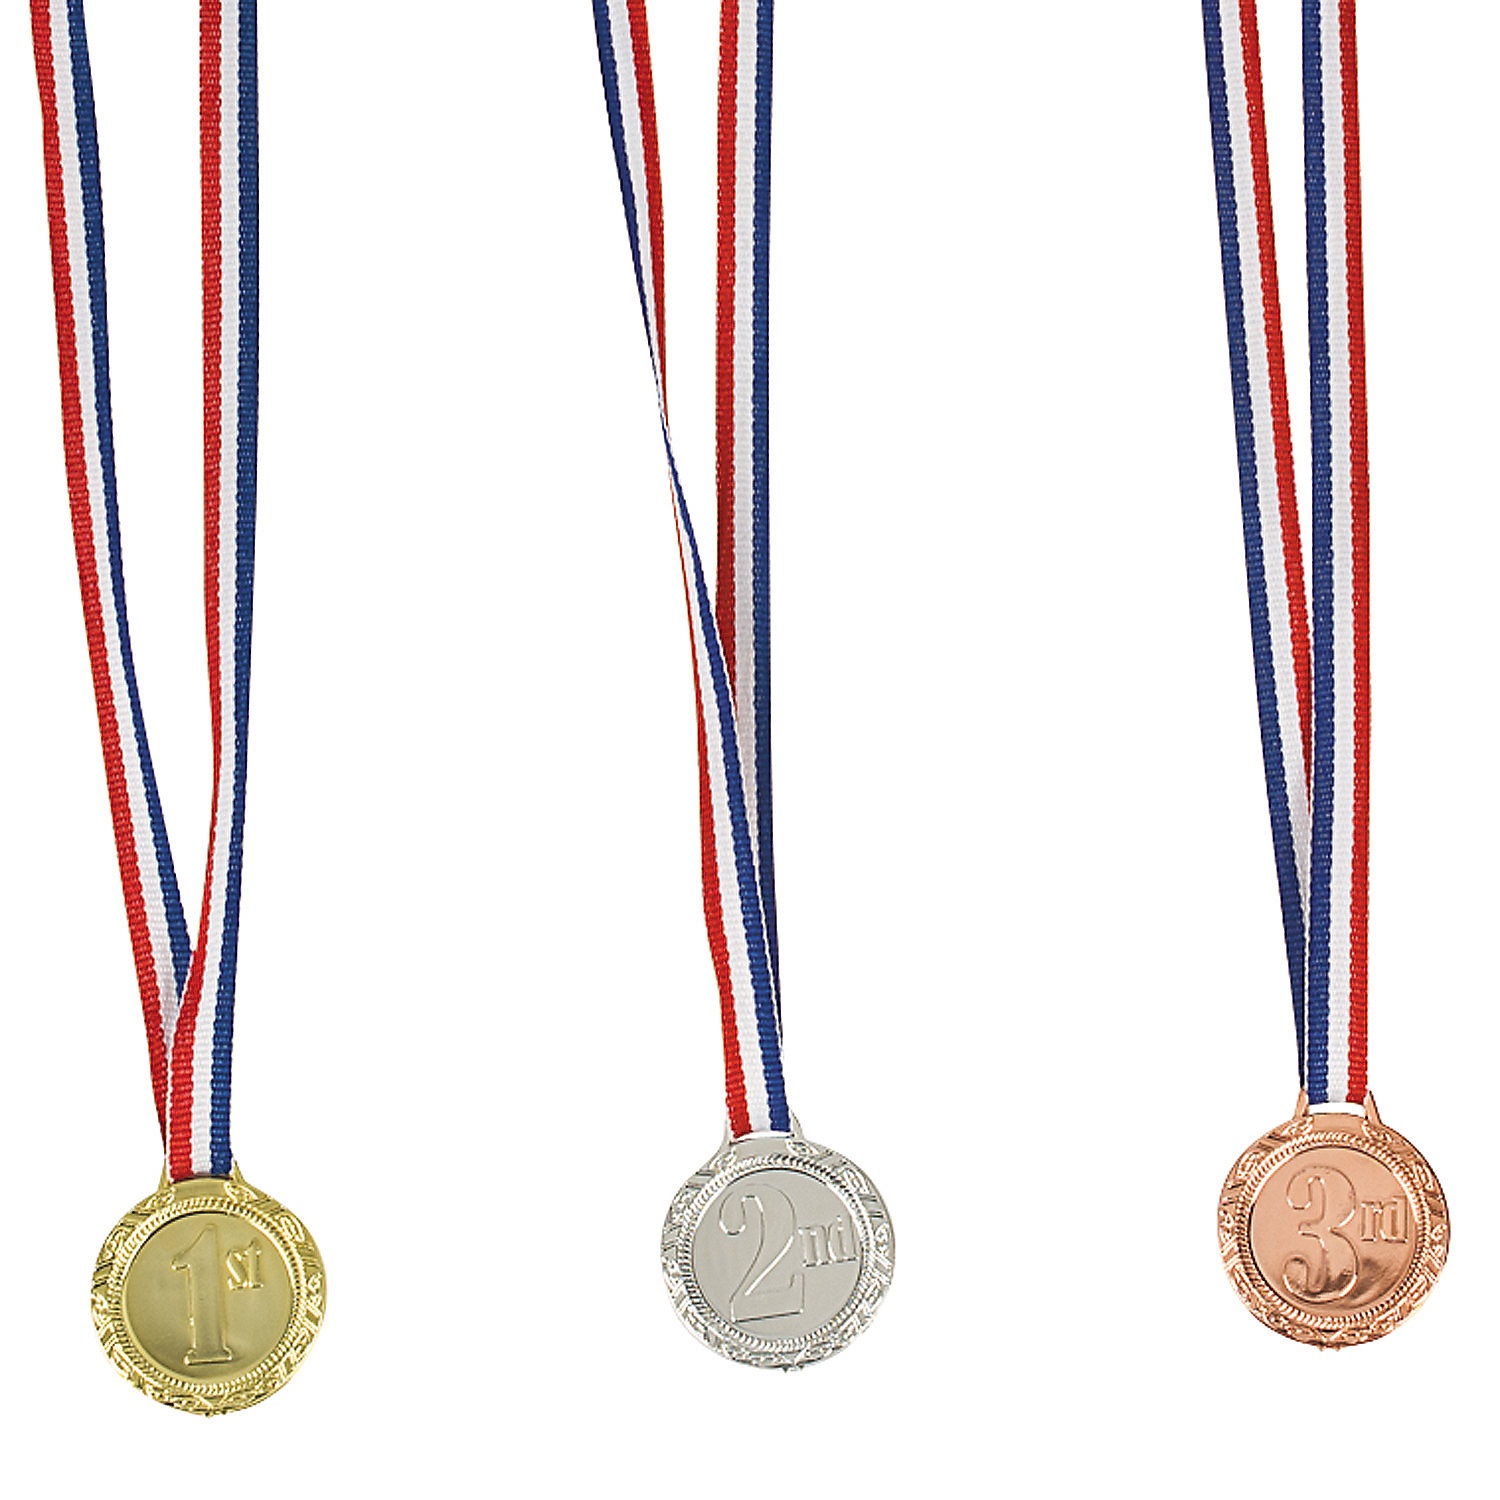 1st-2nd-and-3rd-place-award-medals-12-pc-_39_2191